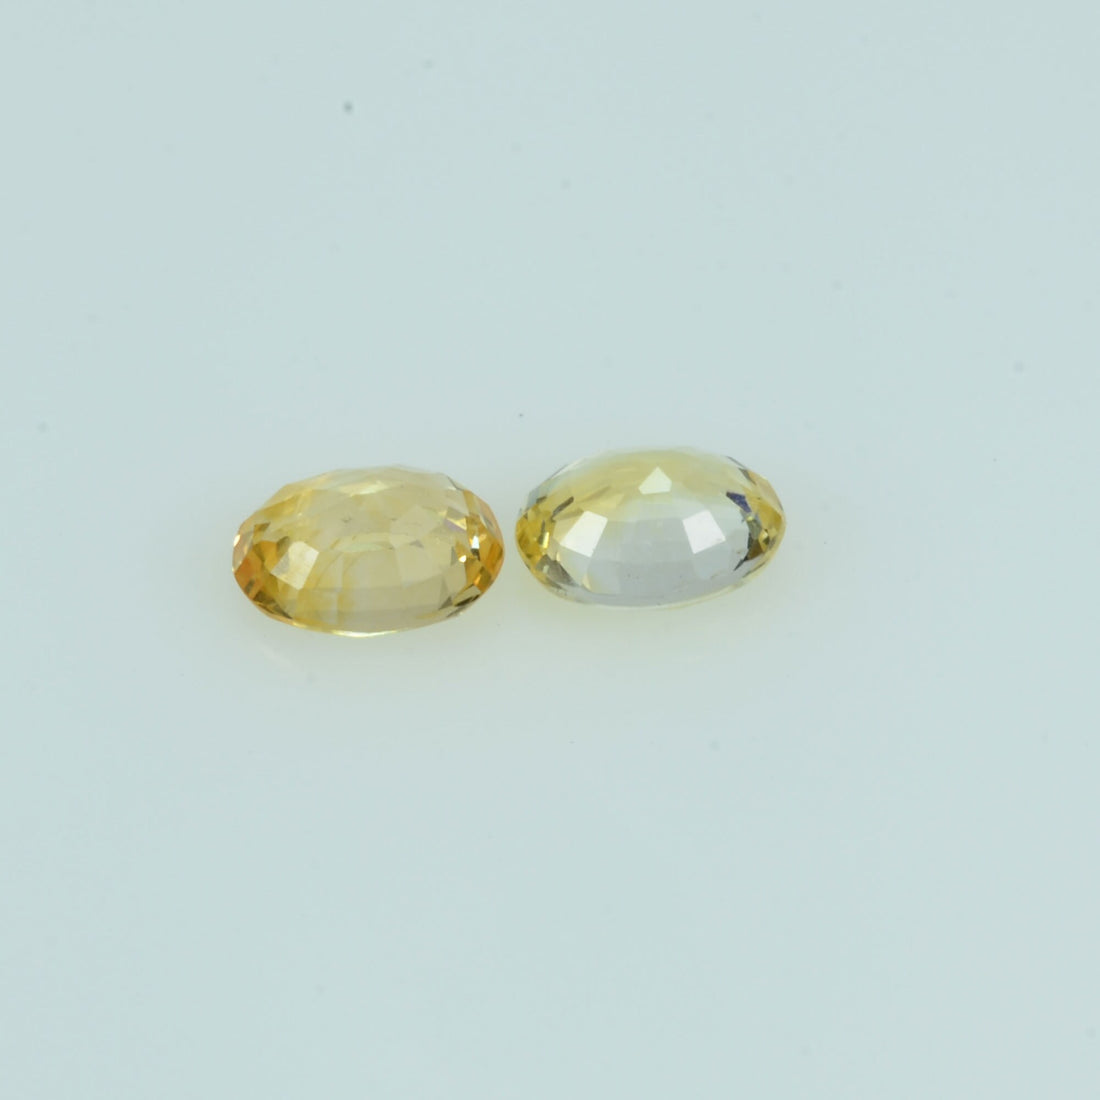 0.48 cts Natural Fancy Sapphire Loose Pair Gemstone Oval Cut